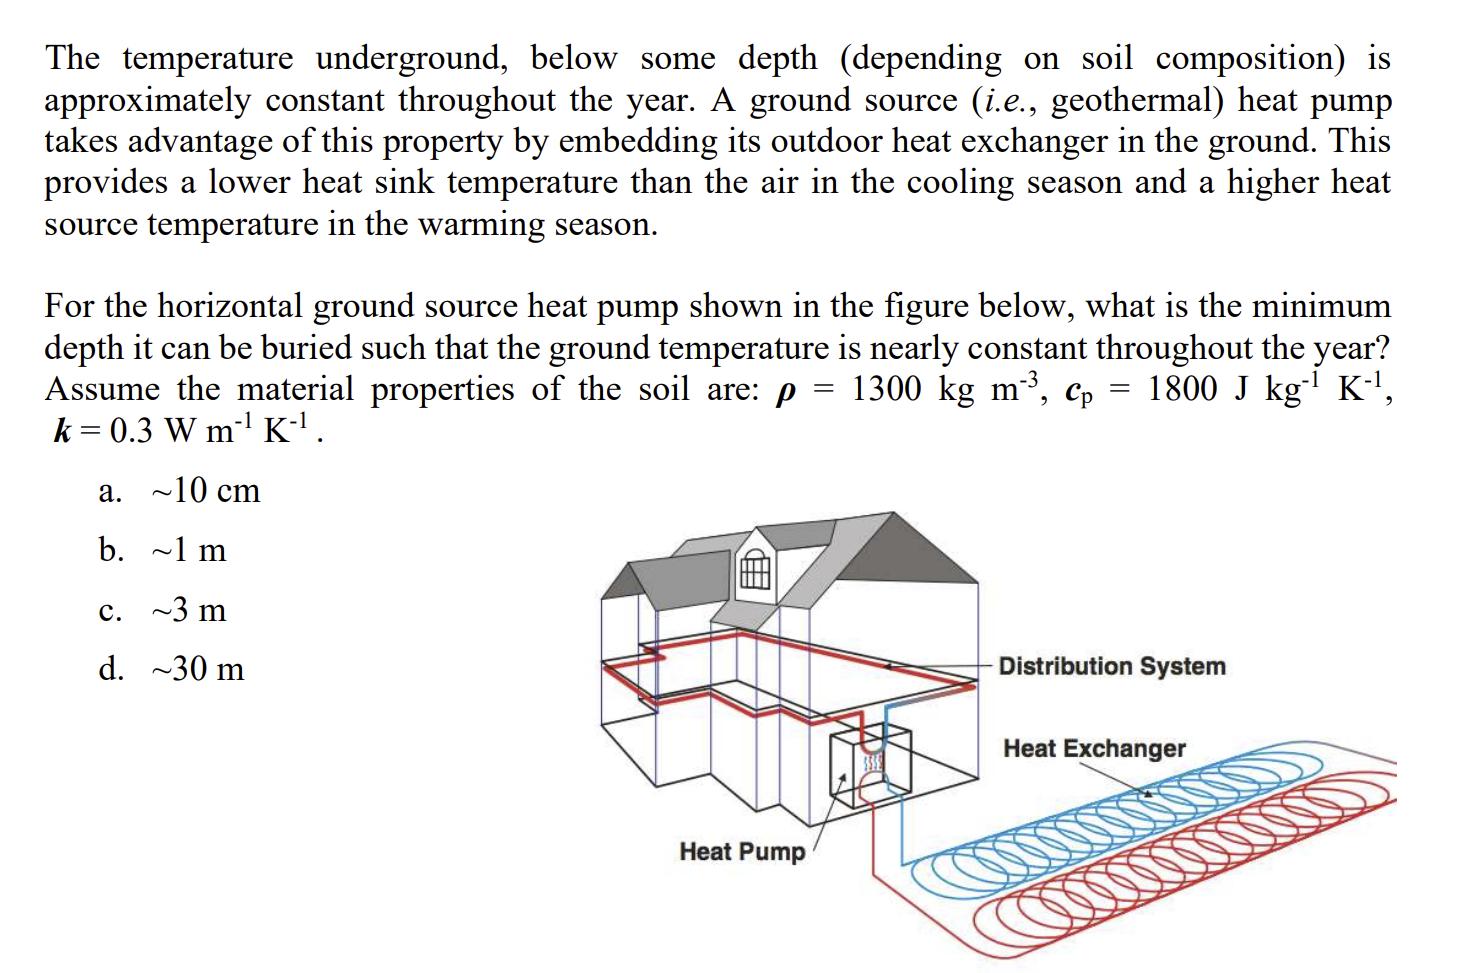 The temperature underground, below some depth (depending on soil composition) is approximately constant